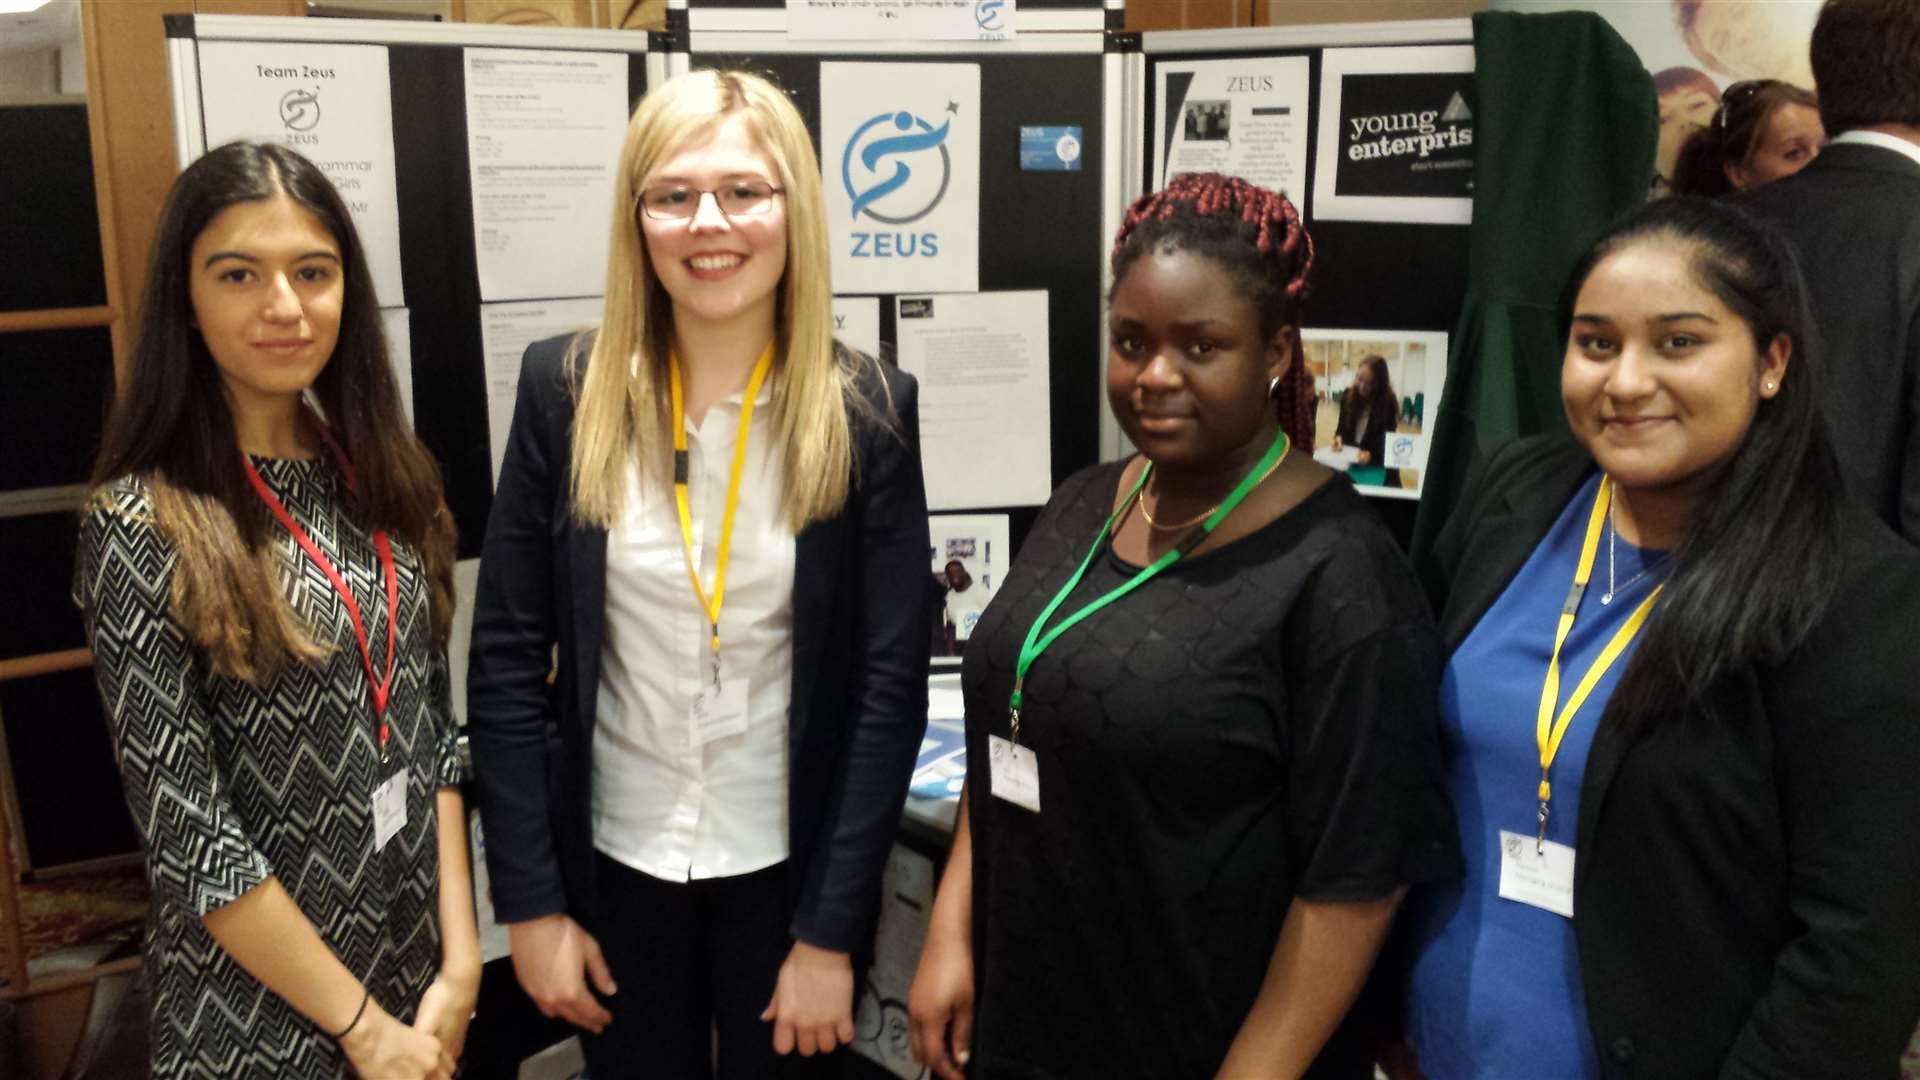 The Young Enterprise Kent & Medway final featured Zeus, a company formed by Dartford Grammar School students